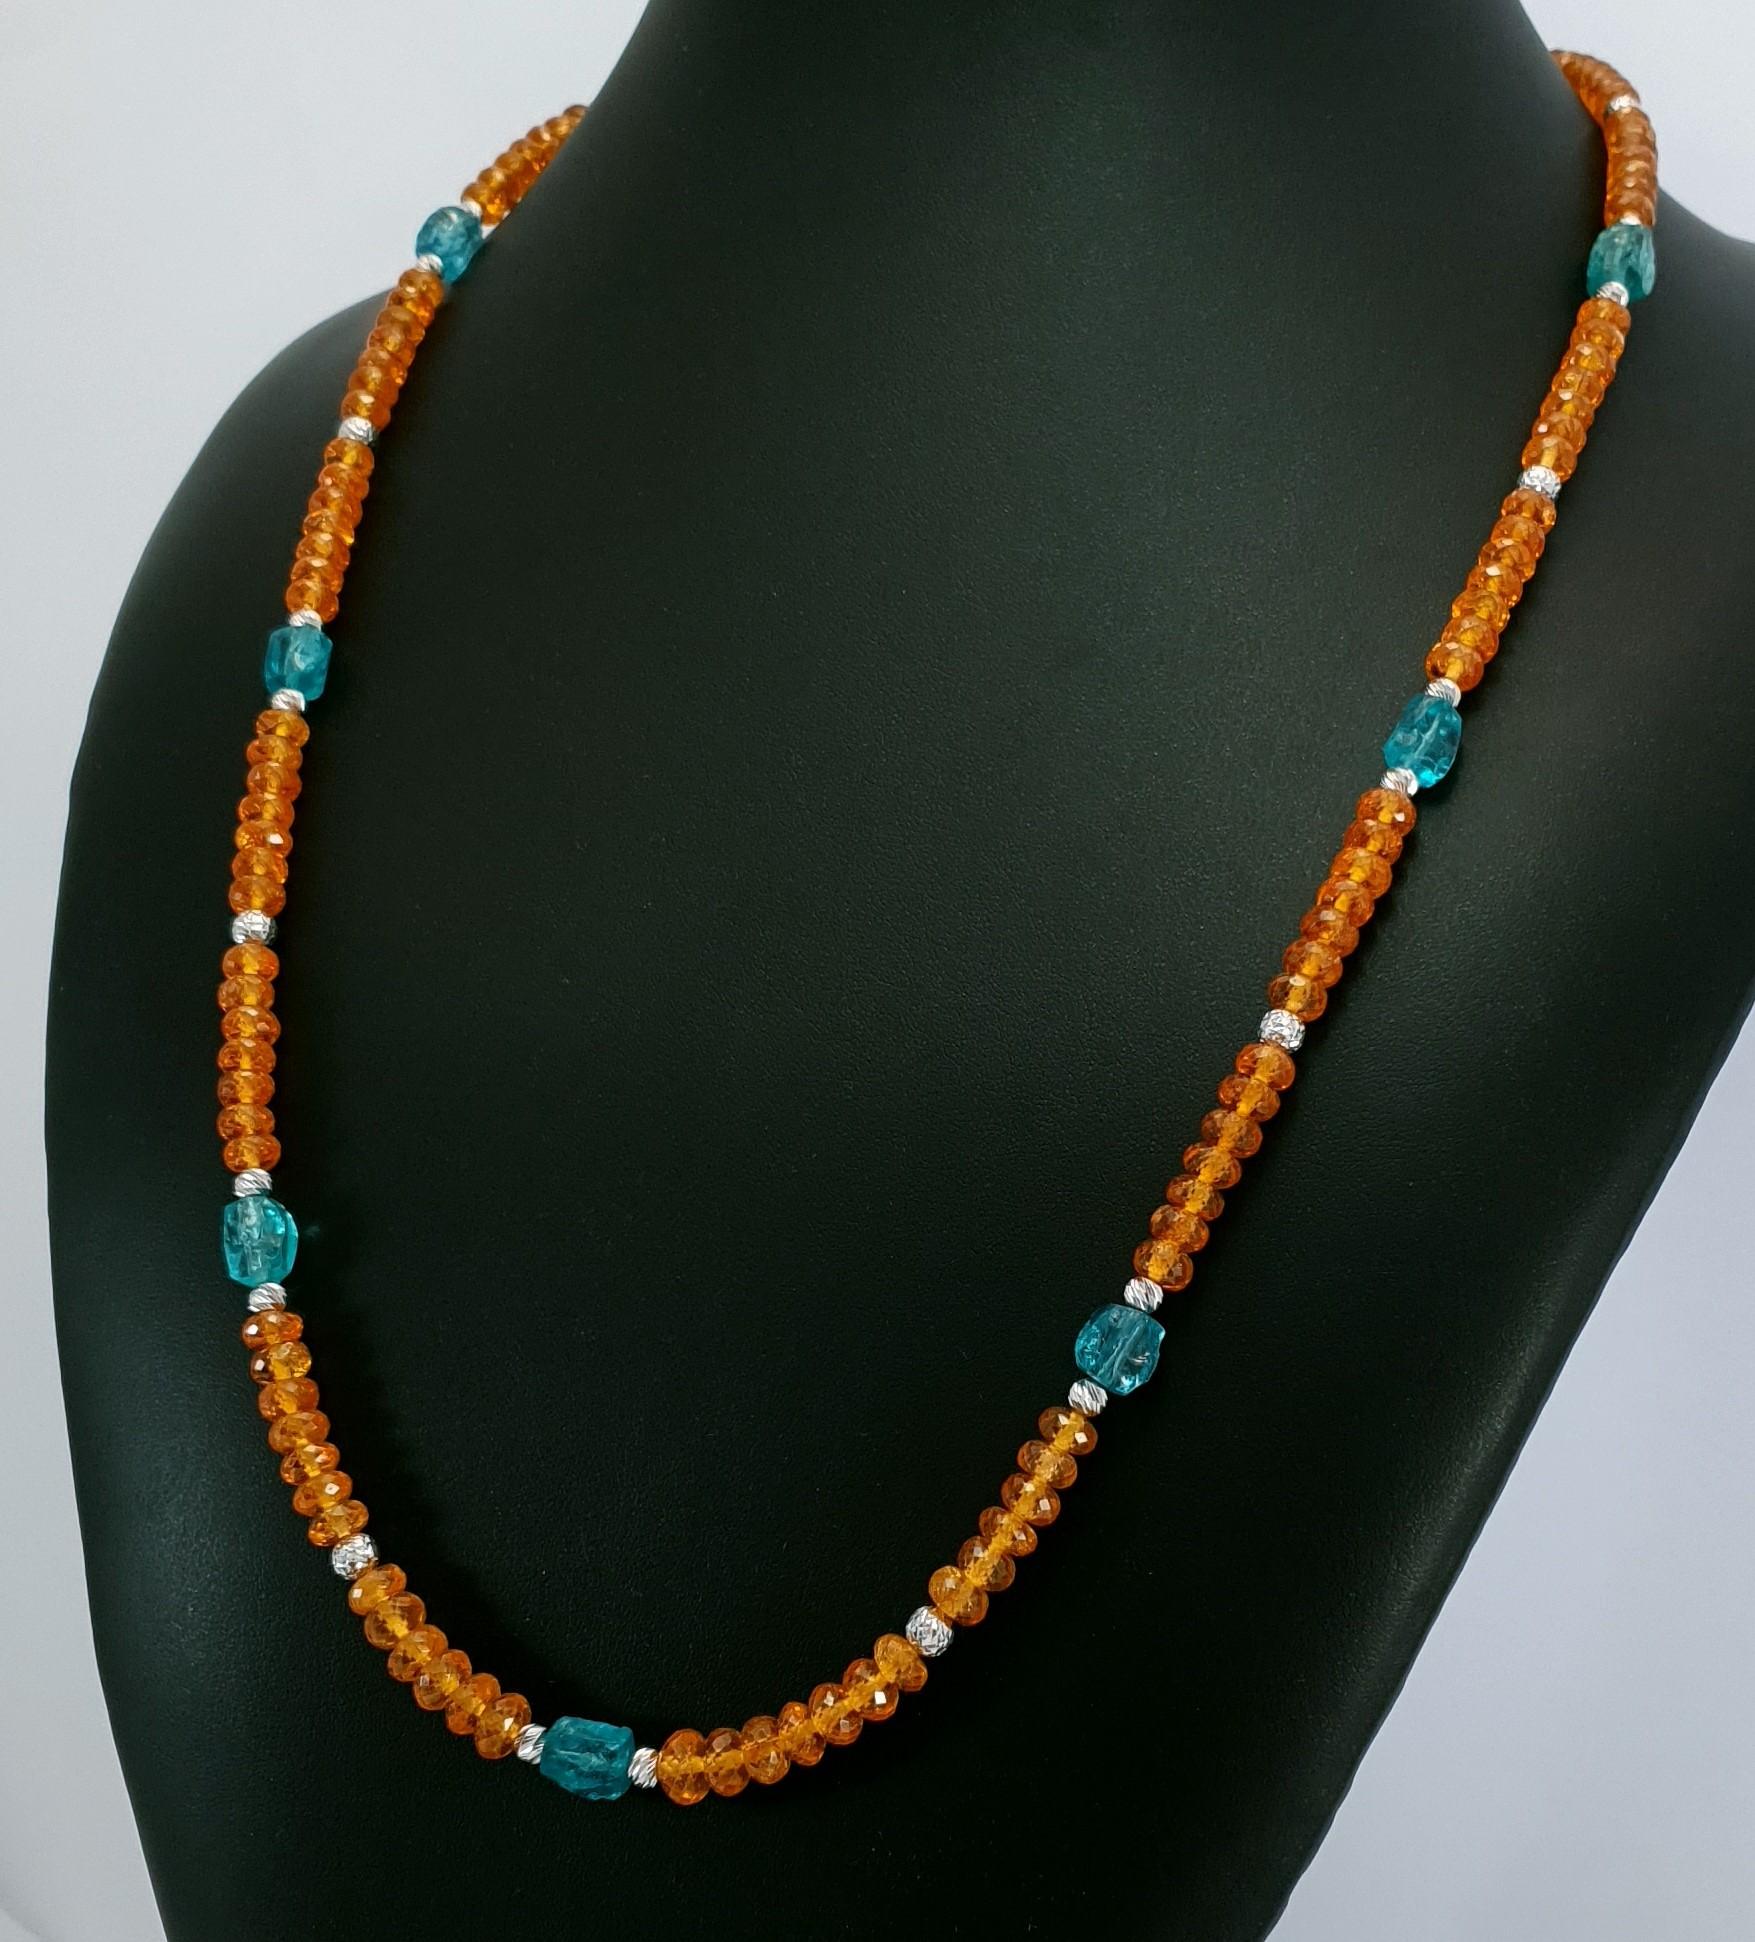 Orange Garnets and Paraiba Color Apatite Beads Necklace with 18 Carat White Gold 8